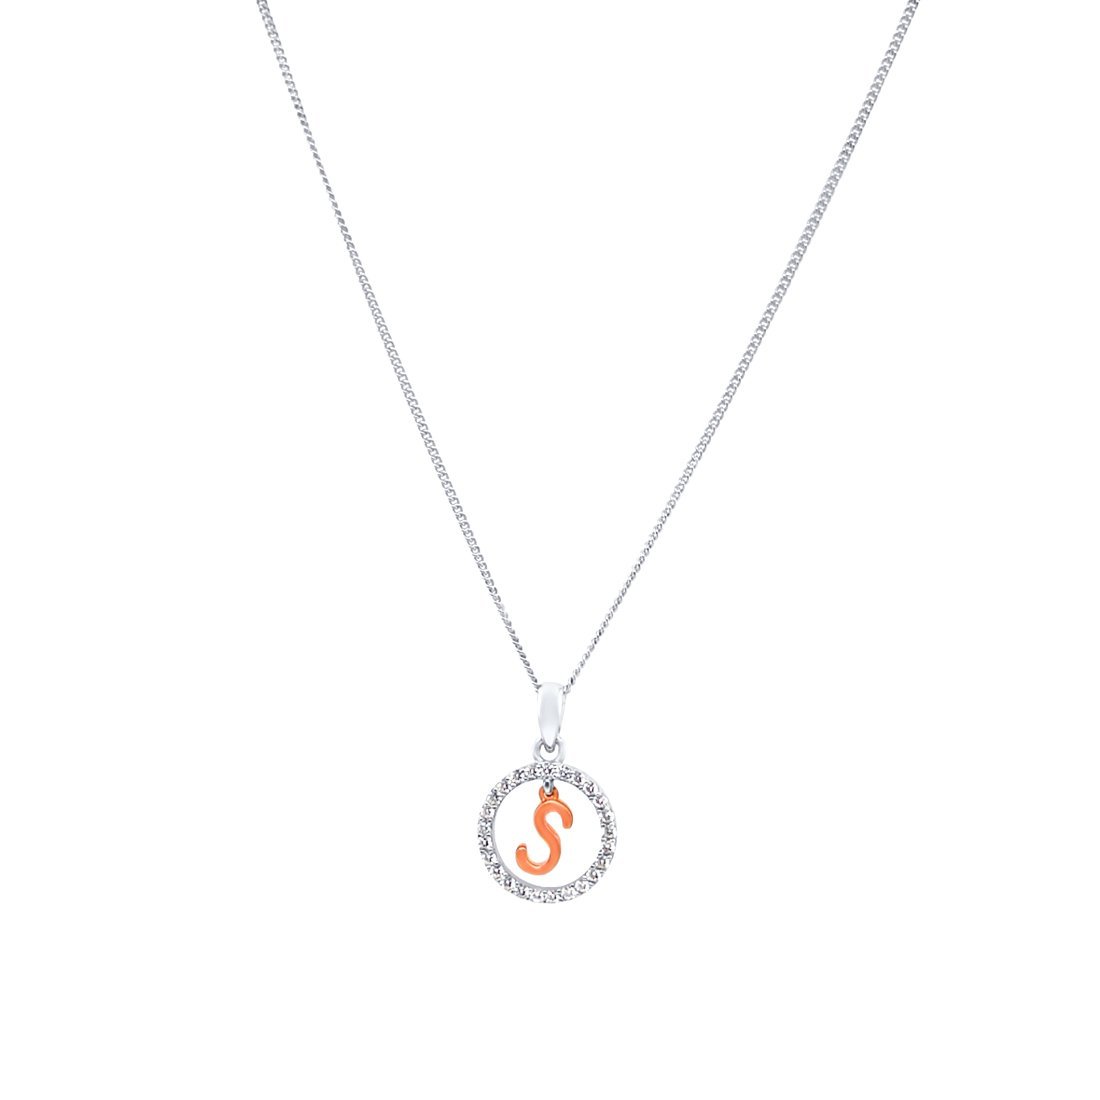 Sterling Silver & Rose Plated Initial Necklace with Cubic Zirconias Necklaces Bevilles S 